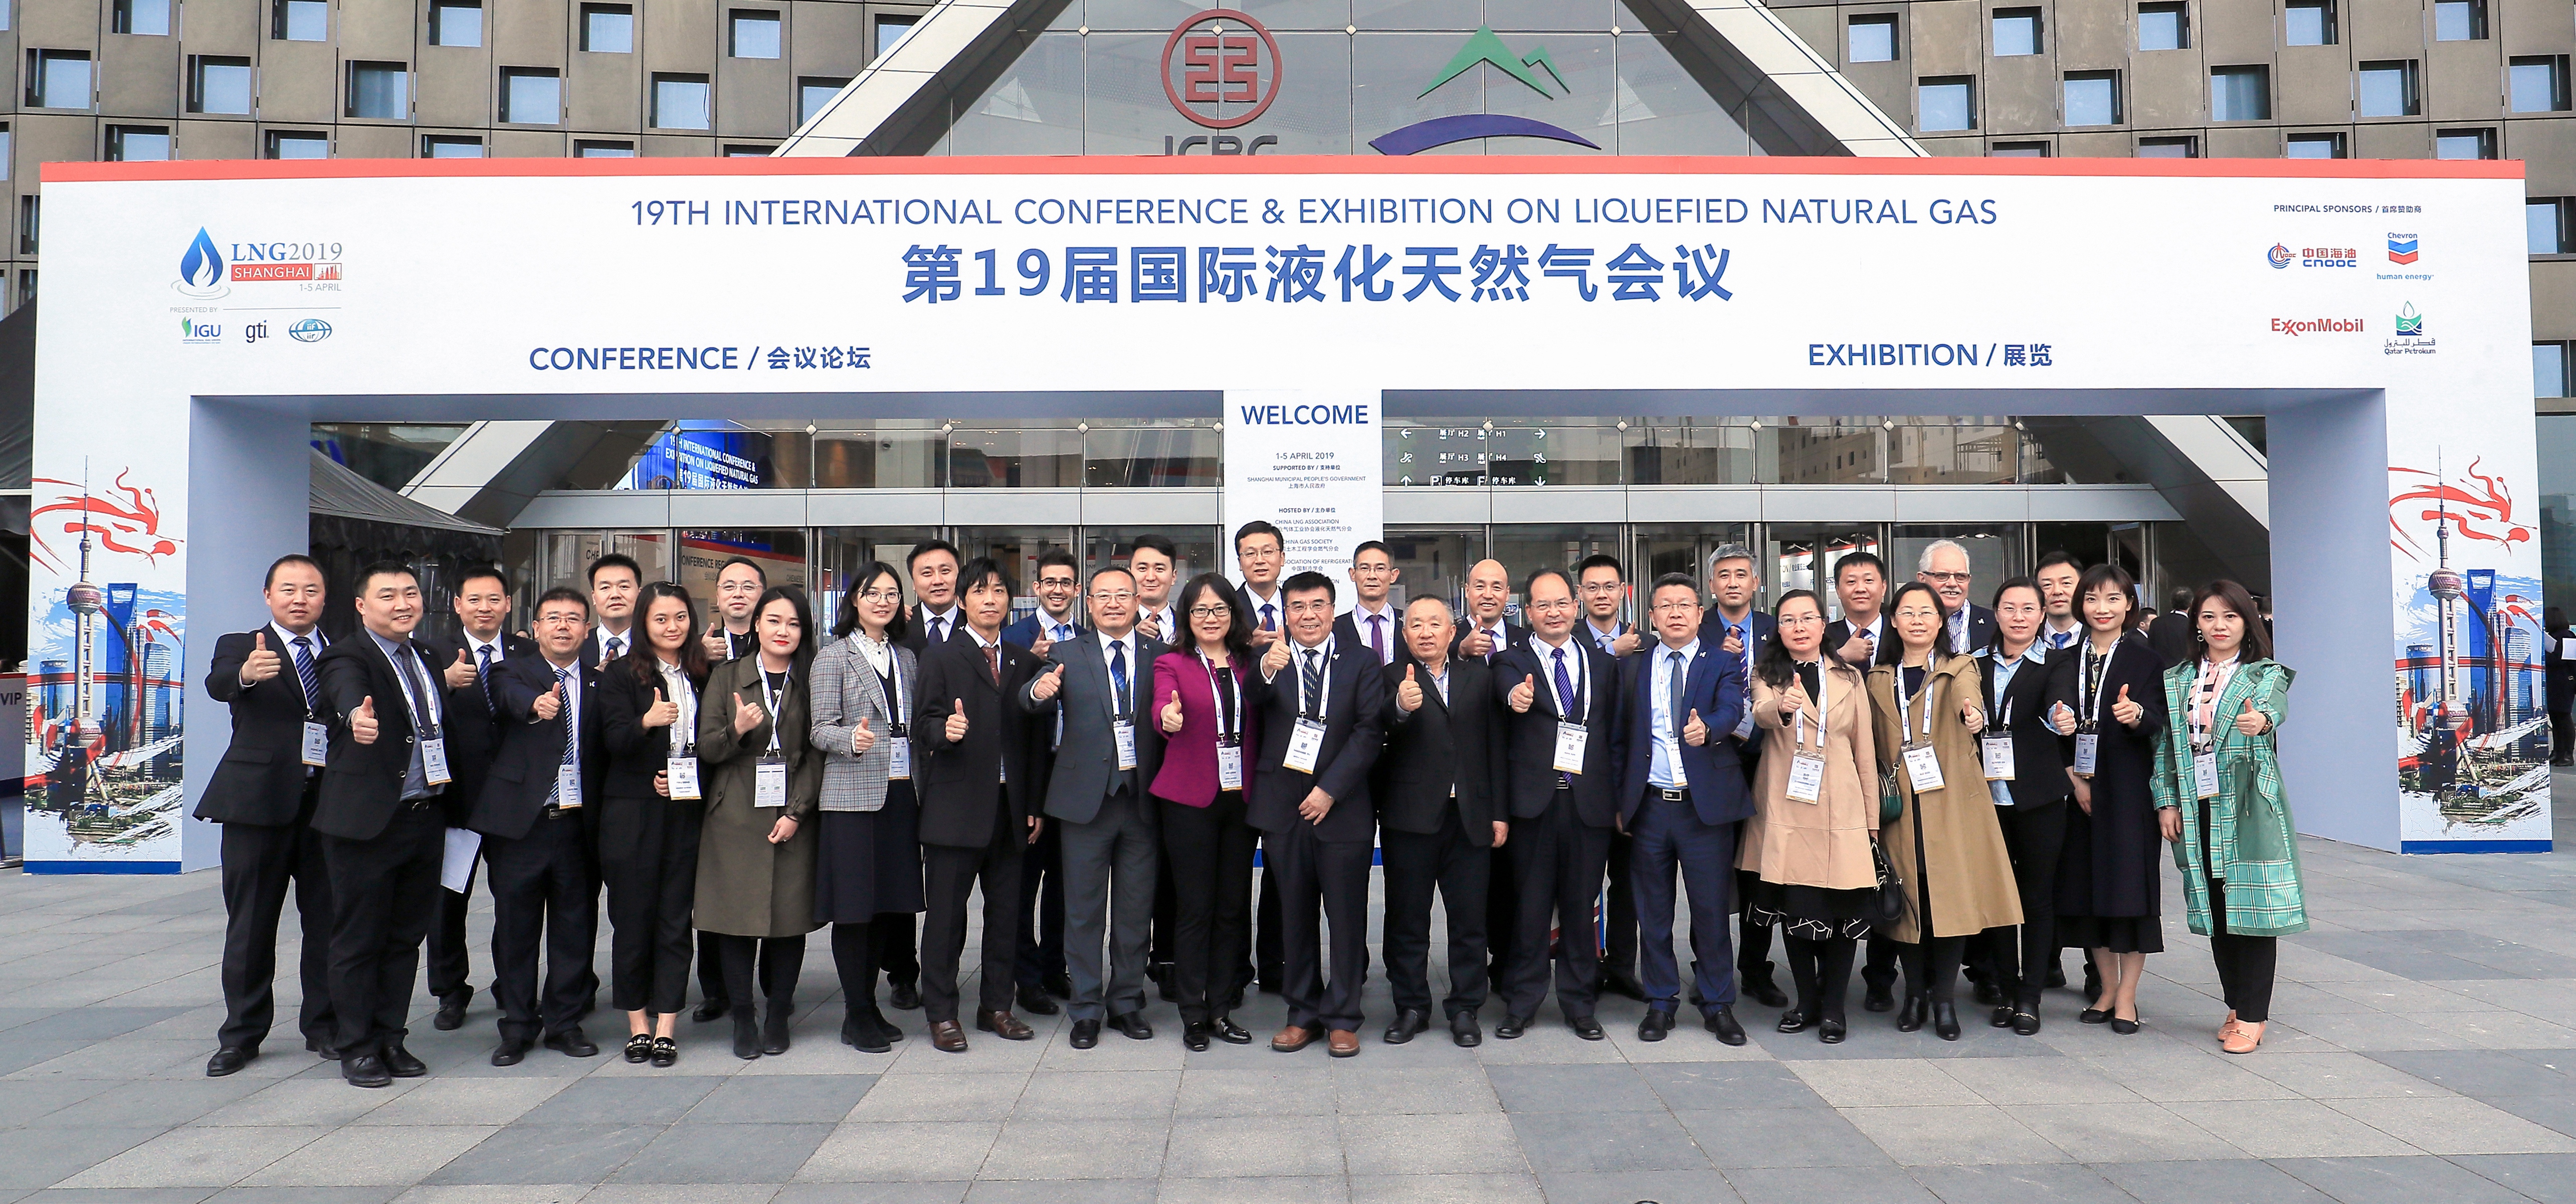 Promoting LNG Innovation and Cooperation to Build a Better Future of Clean Energy – International seminar on Liquefied Natural Gas (I)